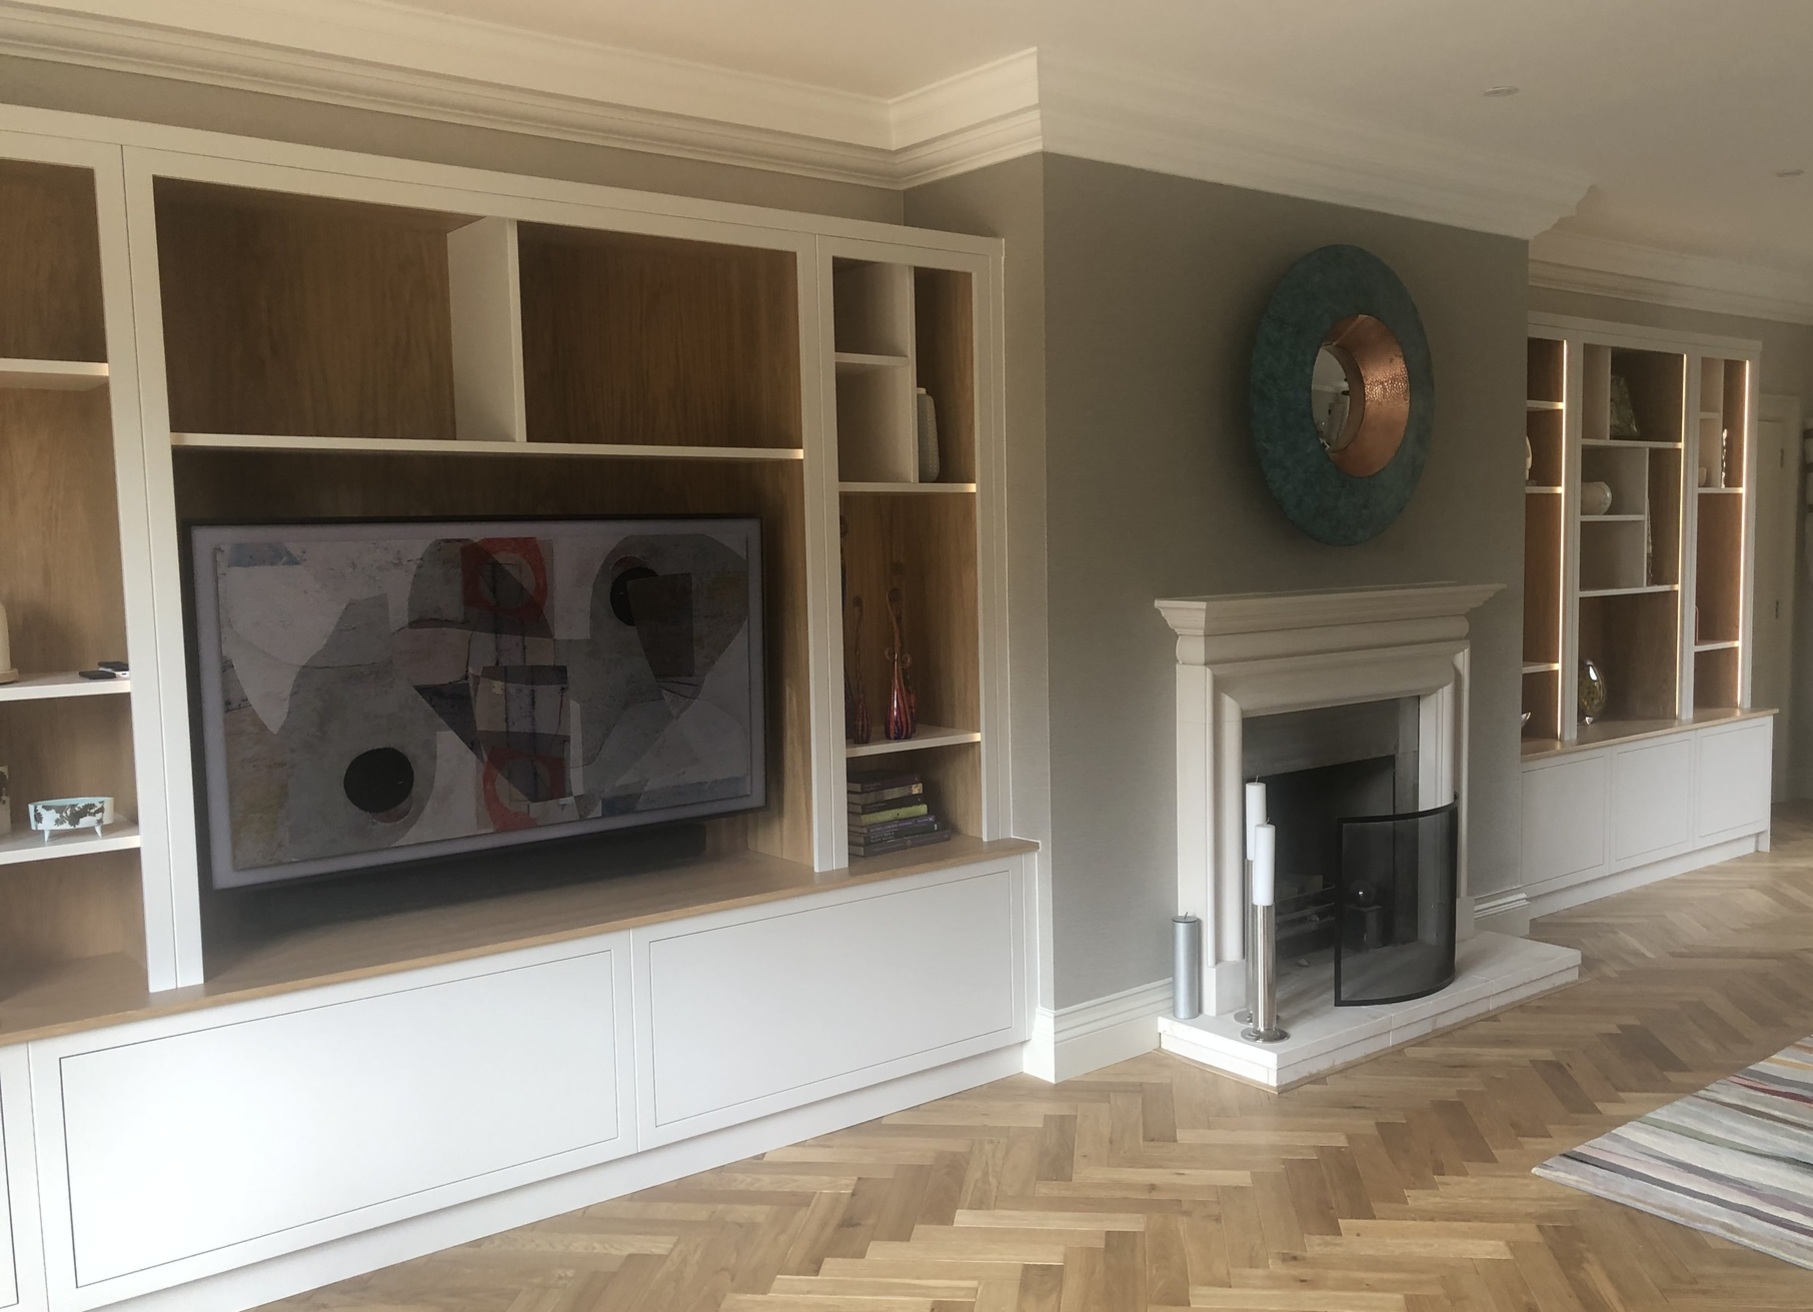 Bespoke living spaces furniture, Oxfordshire